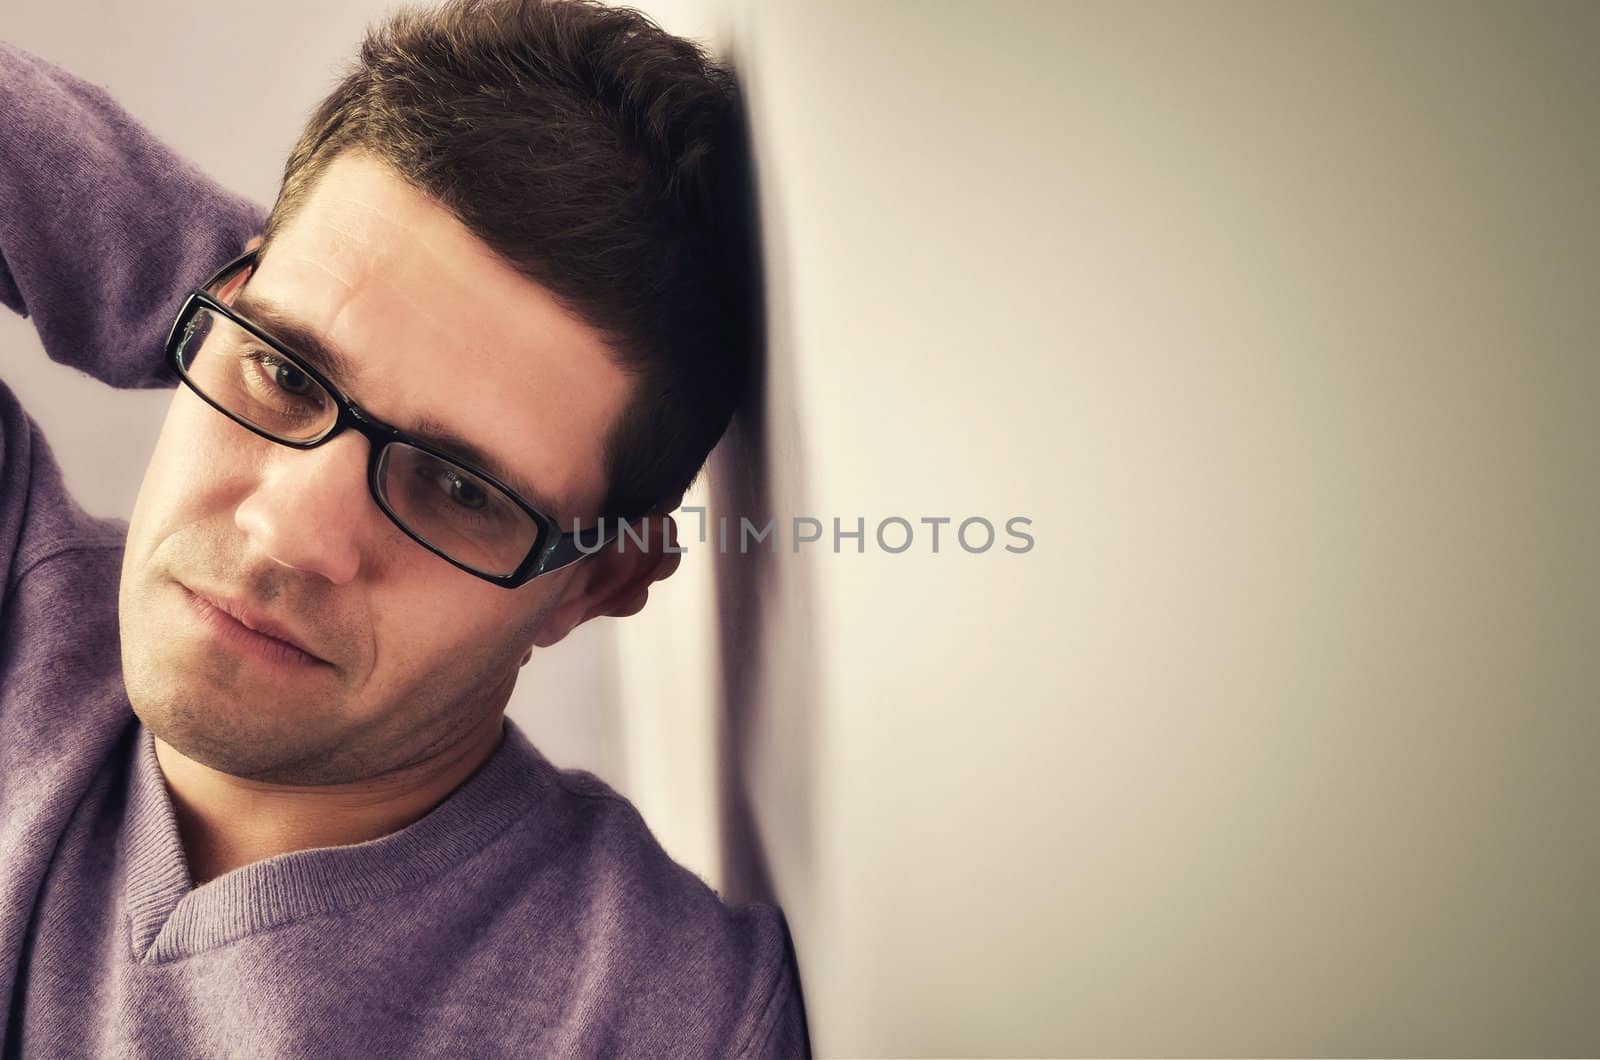 Young man lost in thought against a wall background